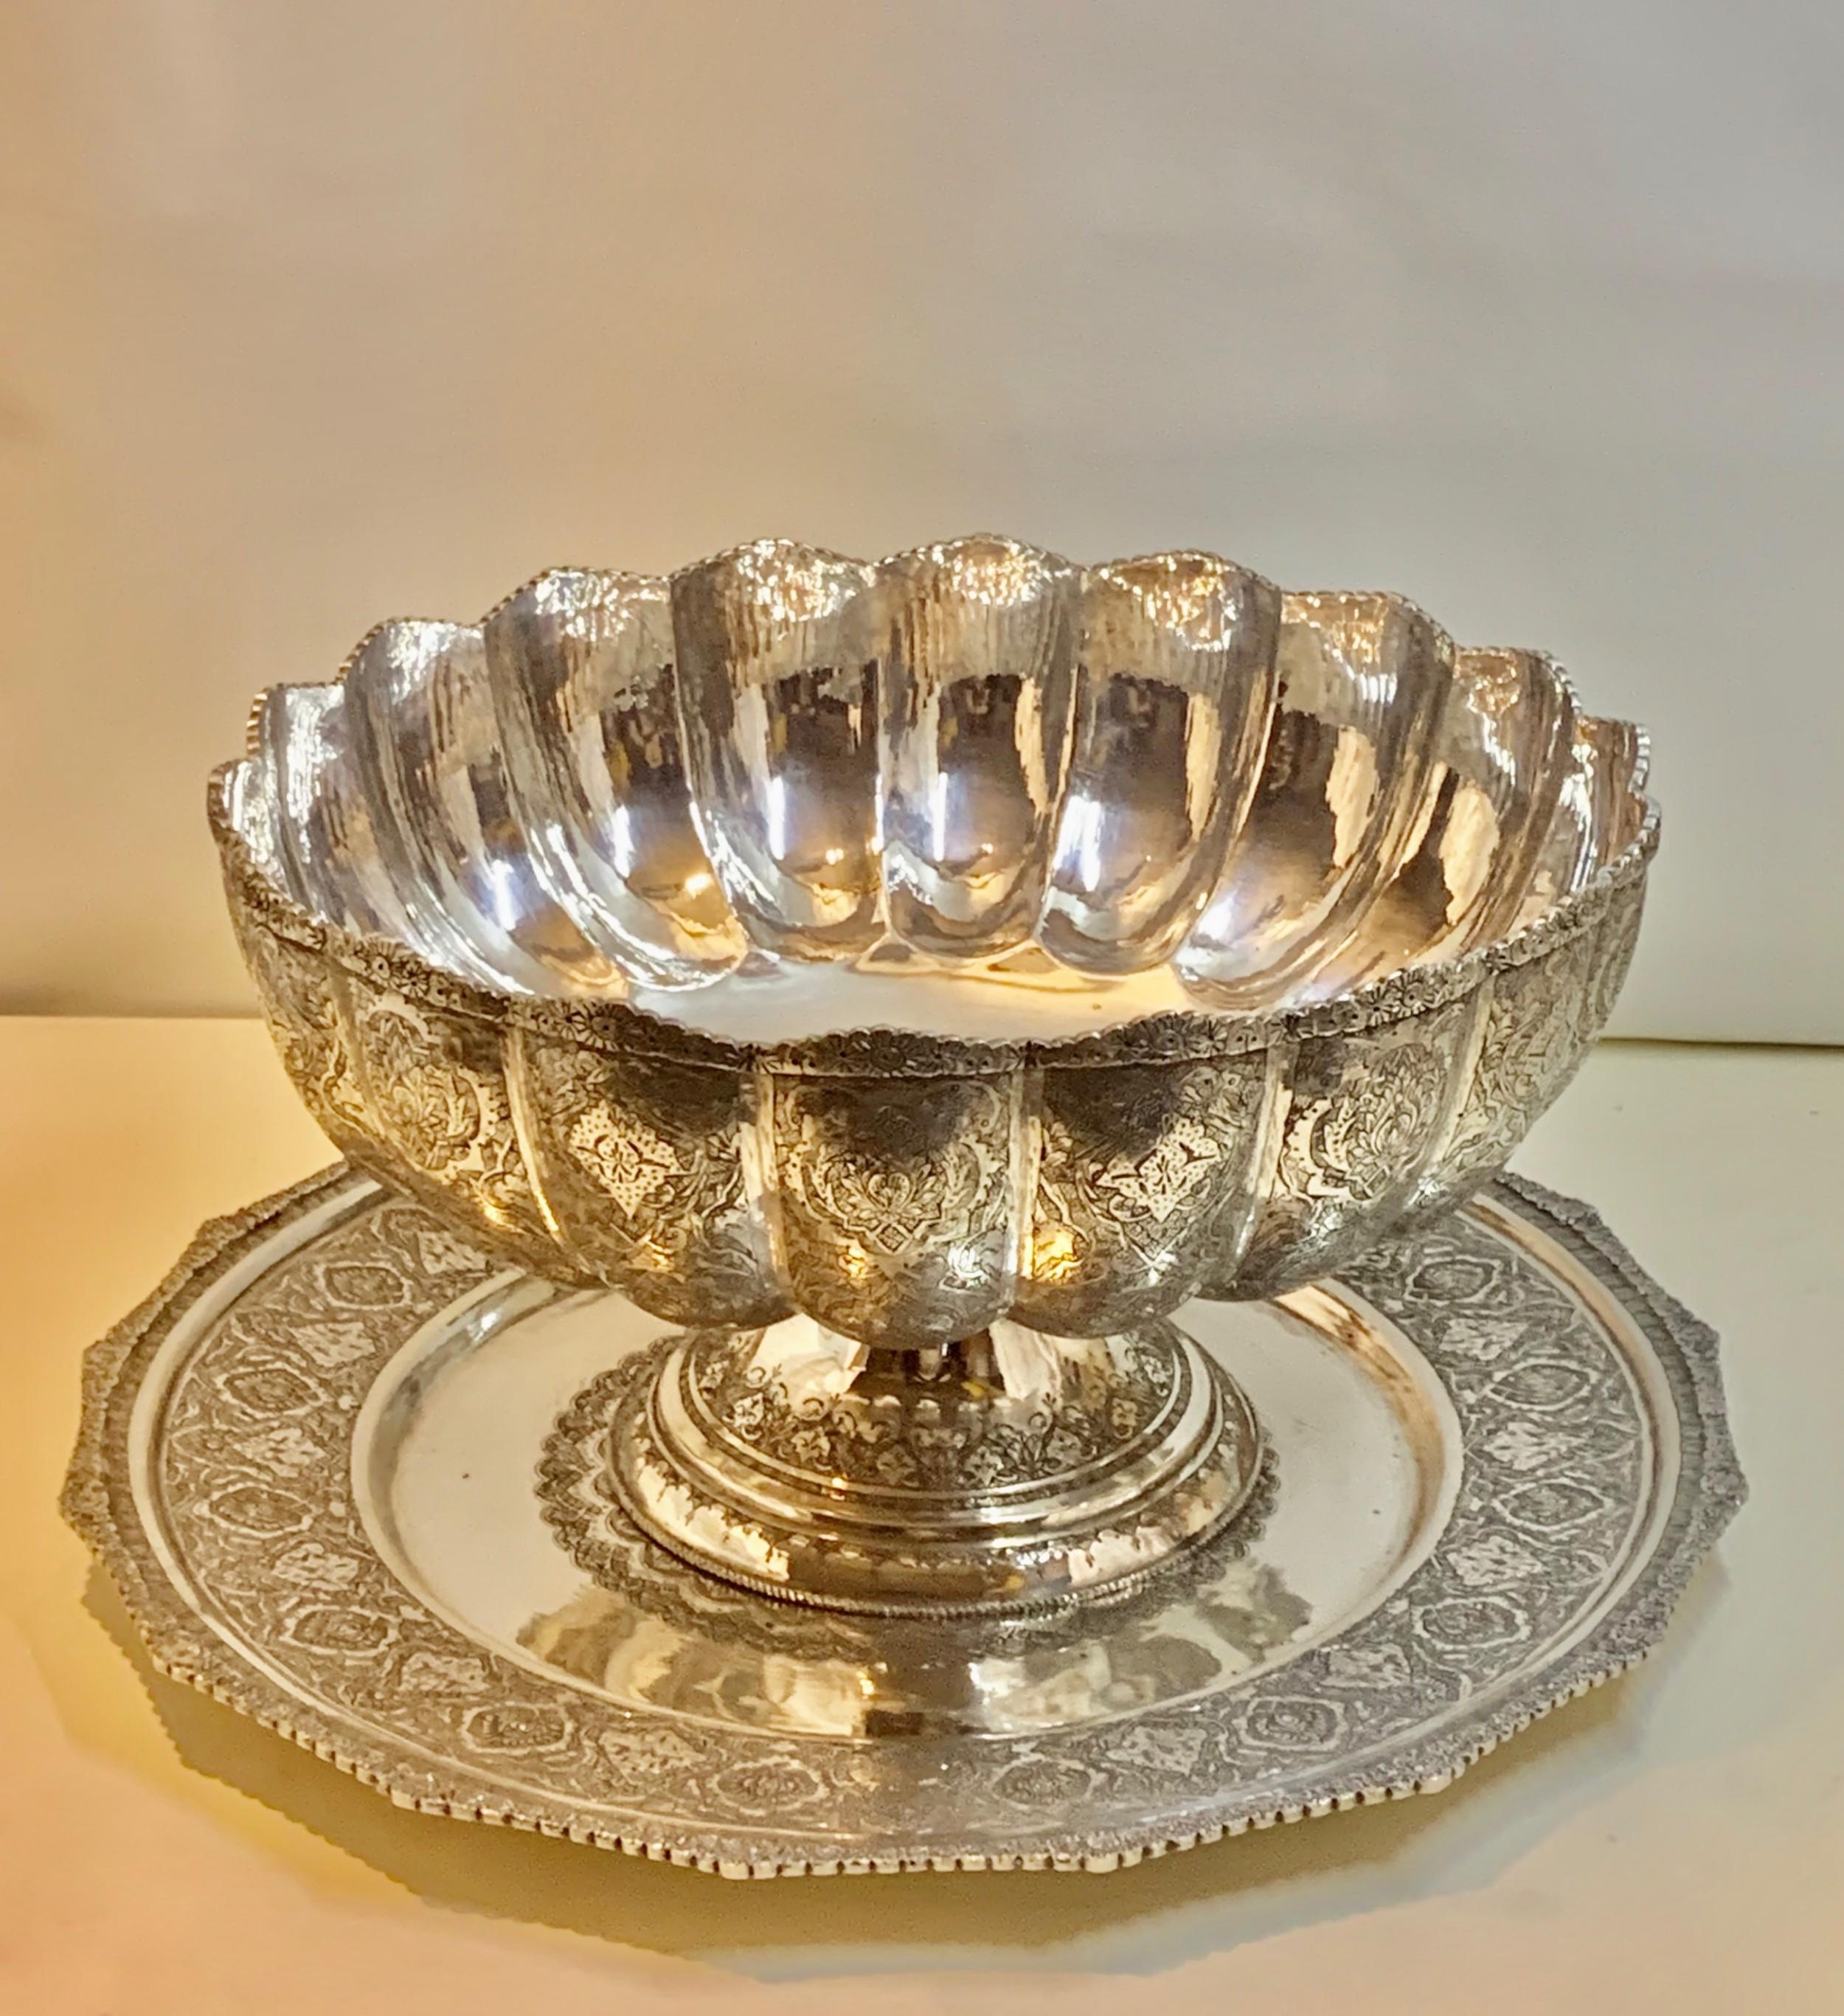 A huge antique early-20th century Persian sterling silver bowl and tray the body is deeply fluted all around. This is profusely engraved with different floral scenes and surrounded by floral motifs on a finely tooled background. The engraving is of